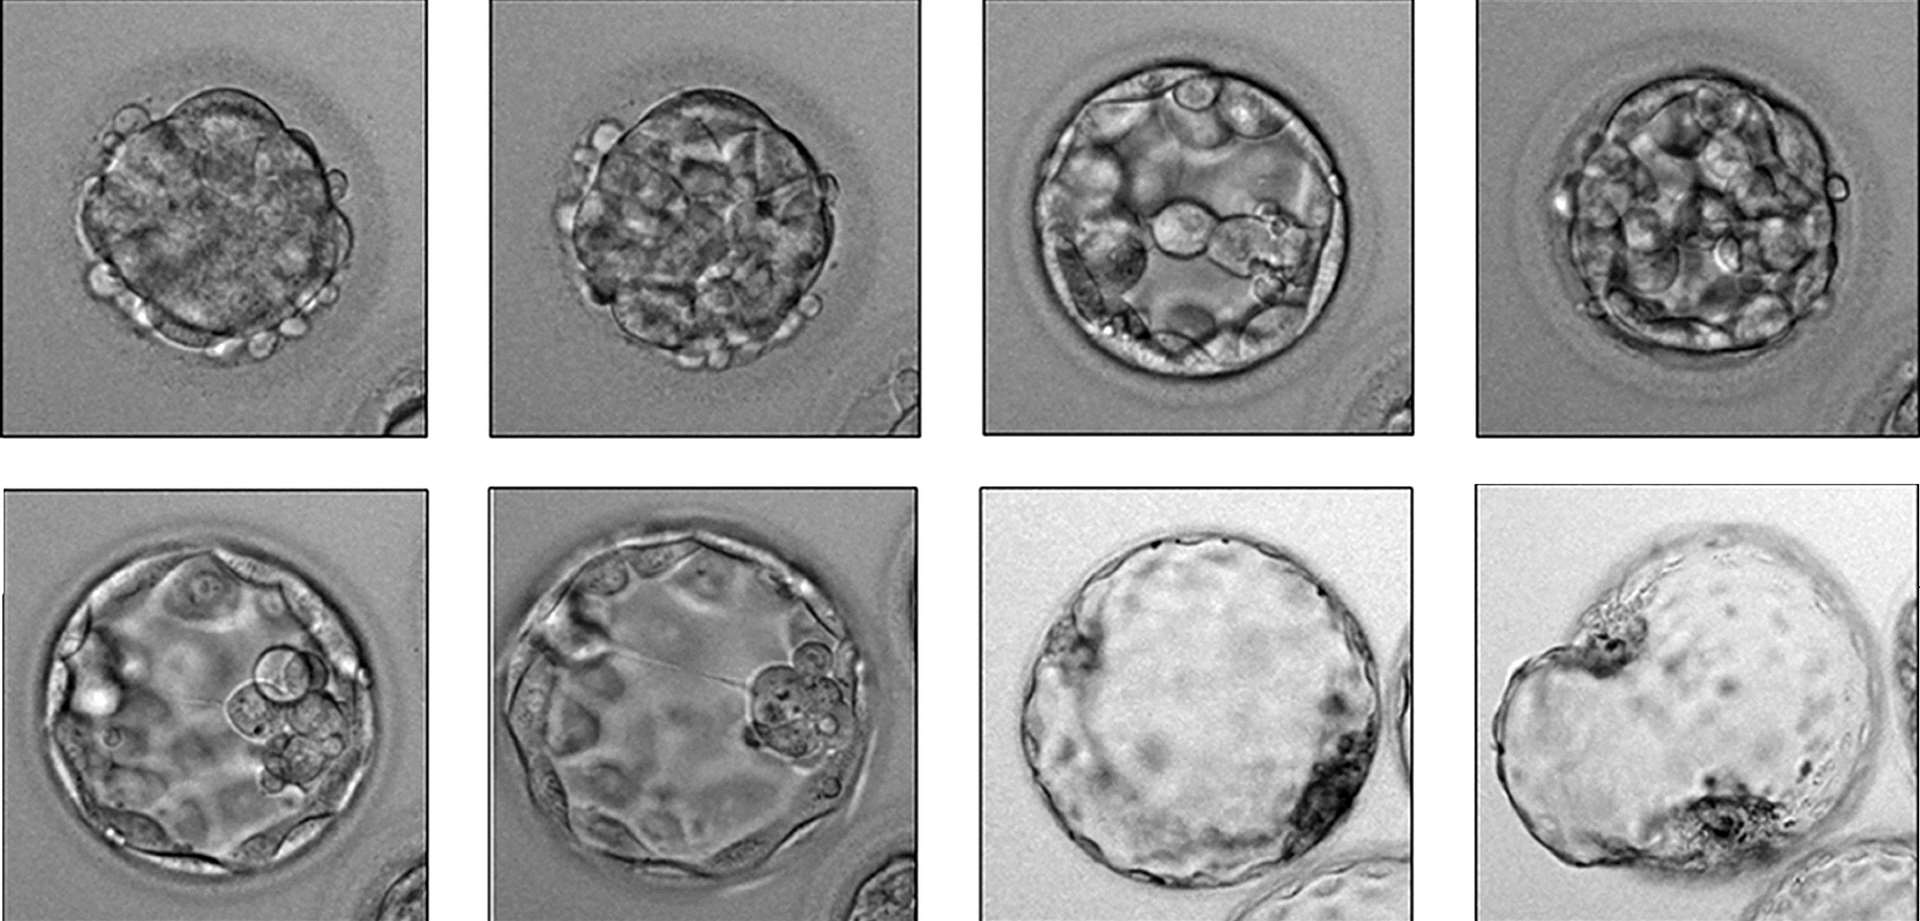 Timelapse images showing an early embryo developing (PA)